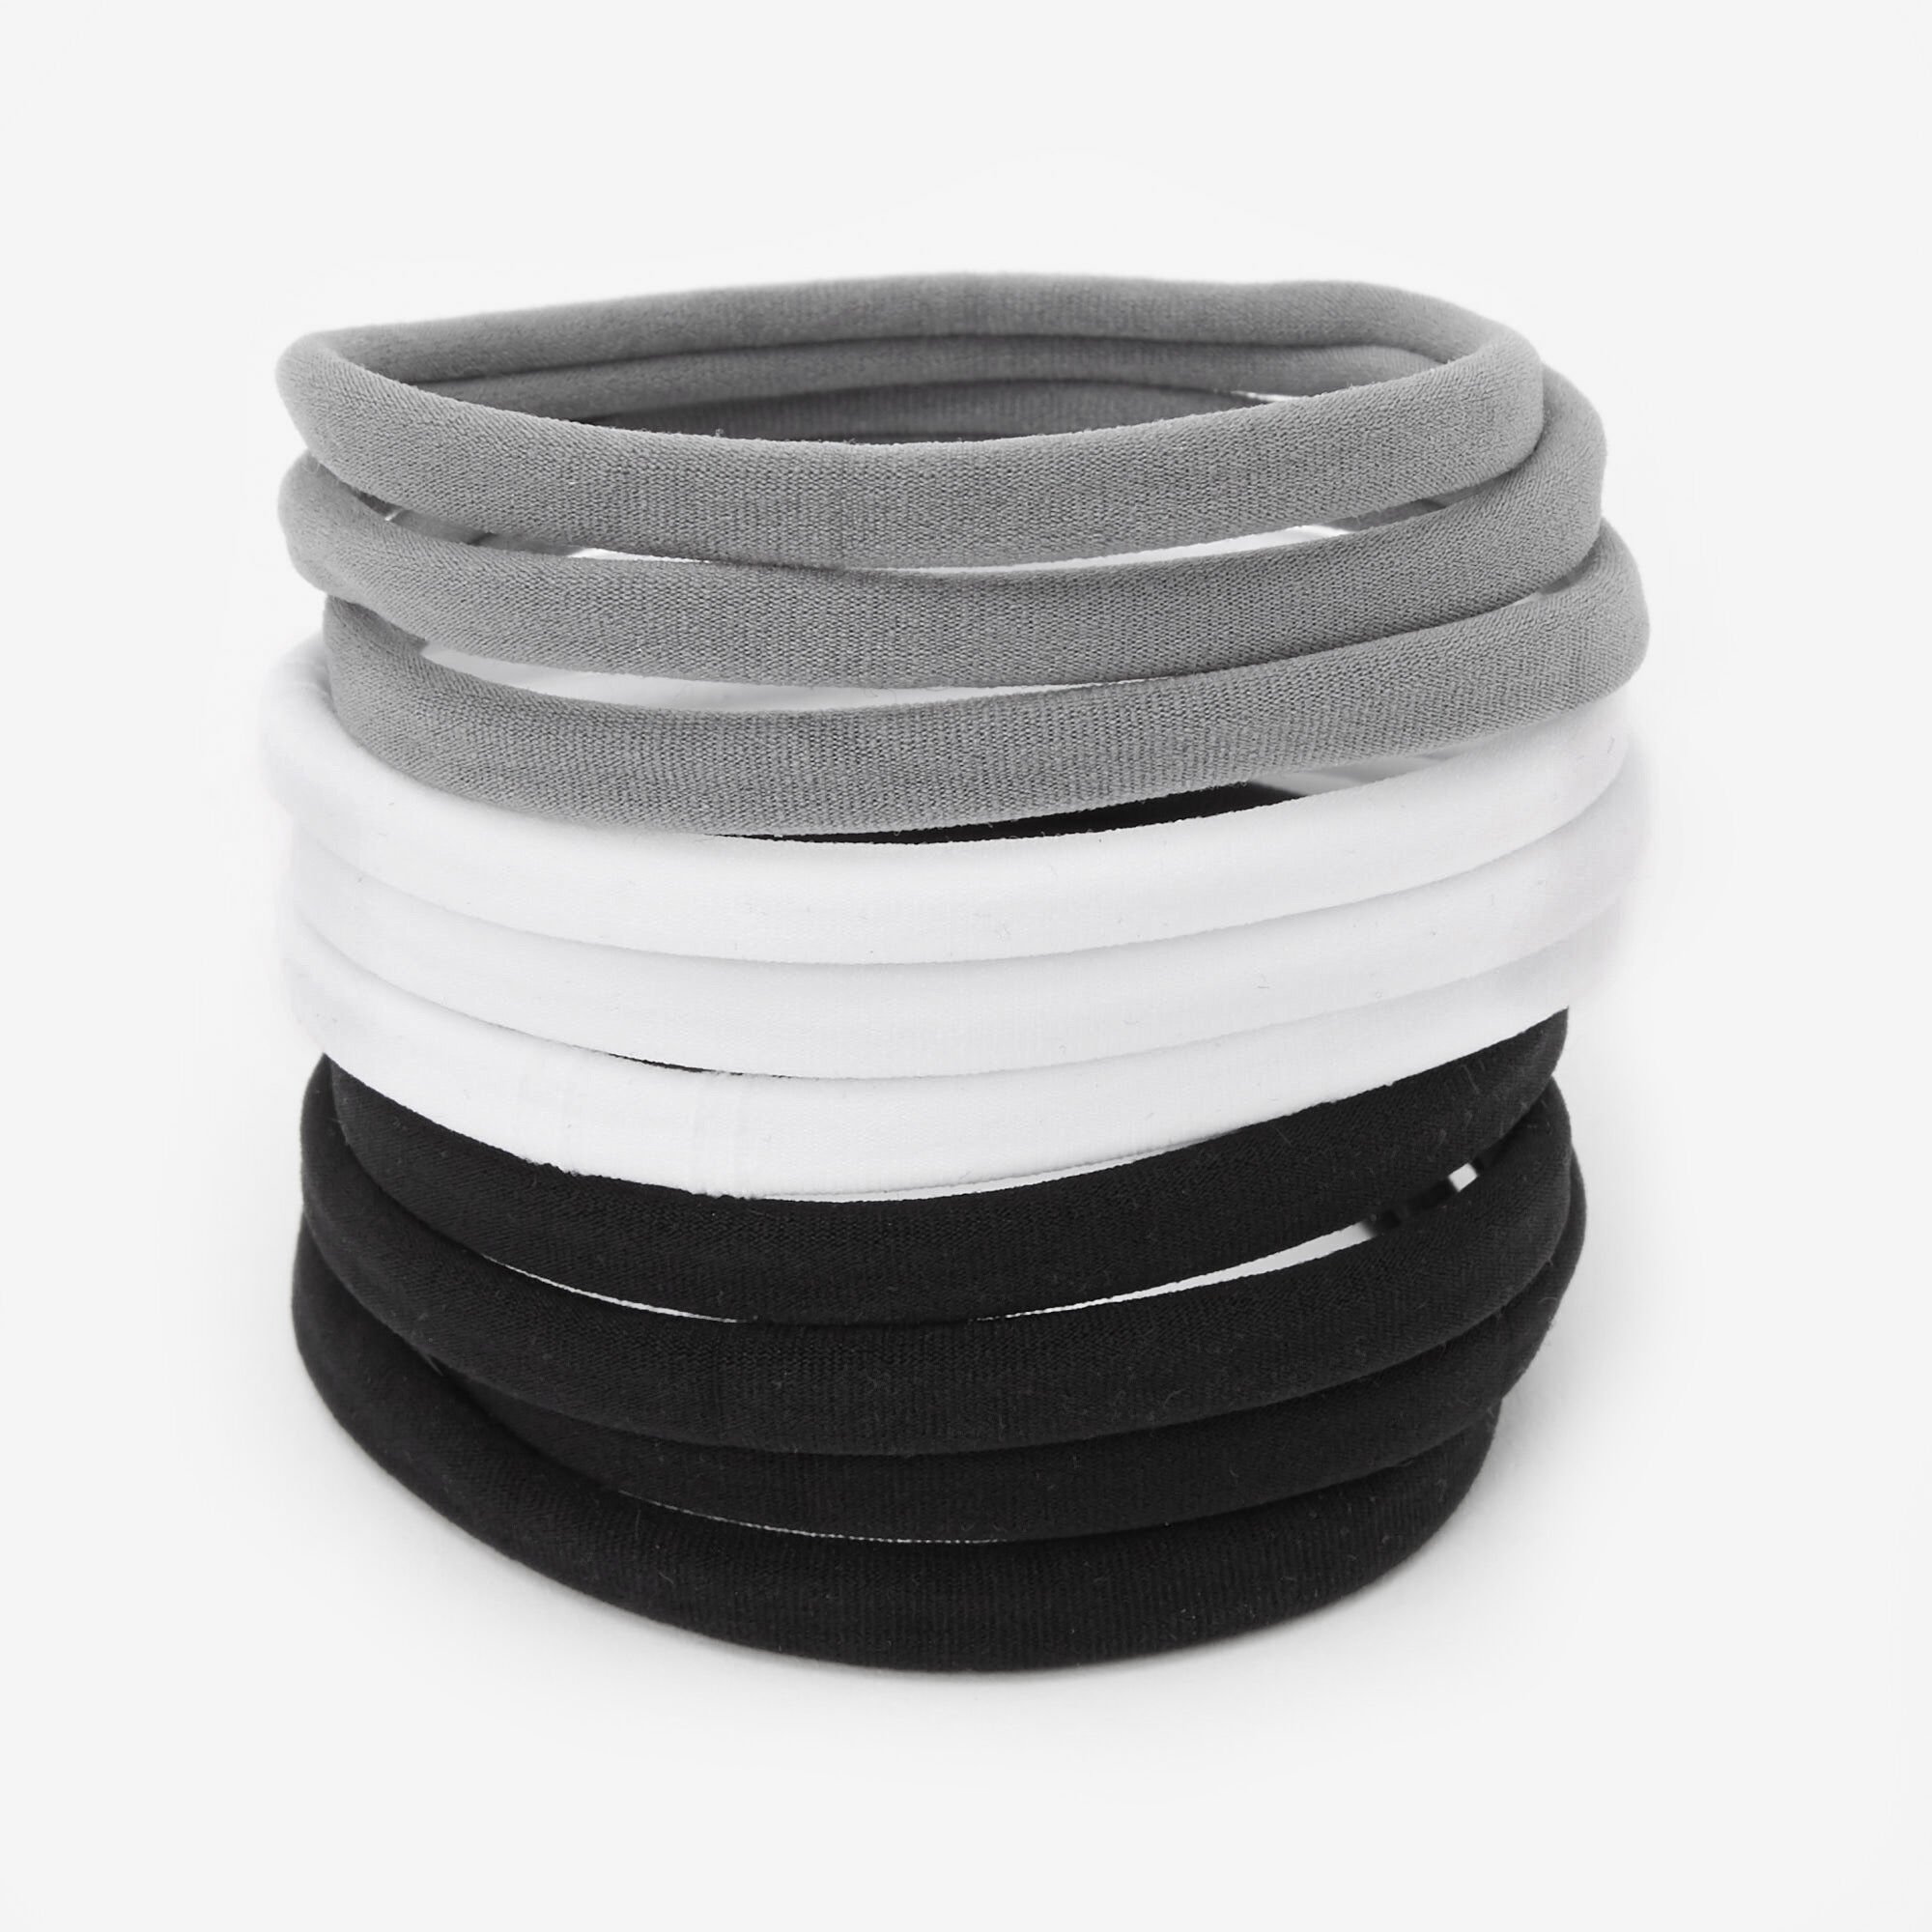 View Claires Black Gray Rolled Hair Ties 10 Pack White information